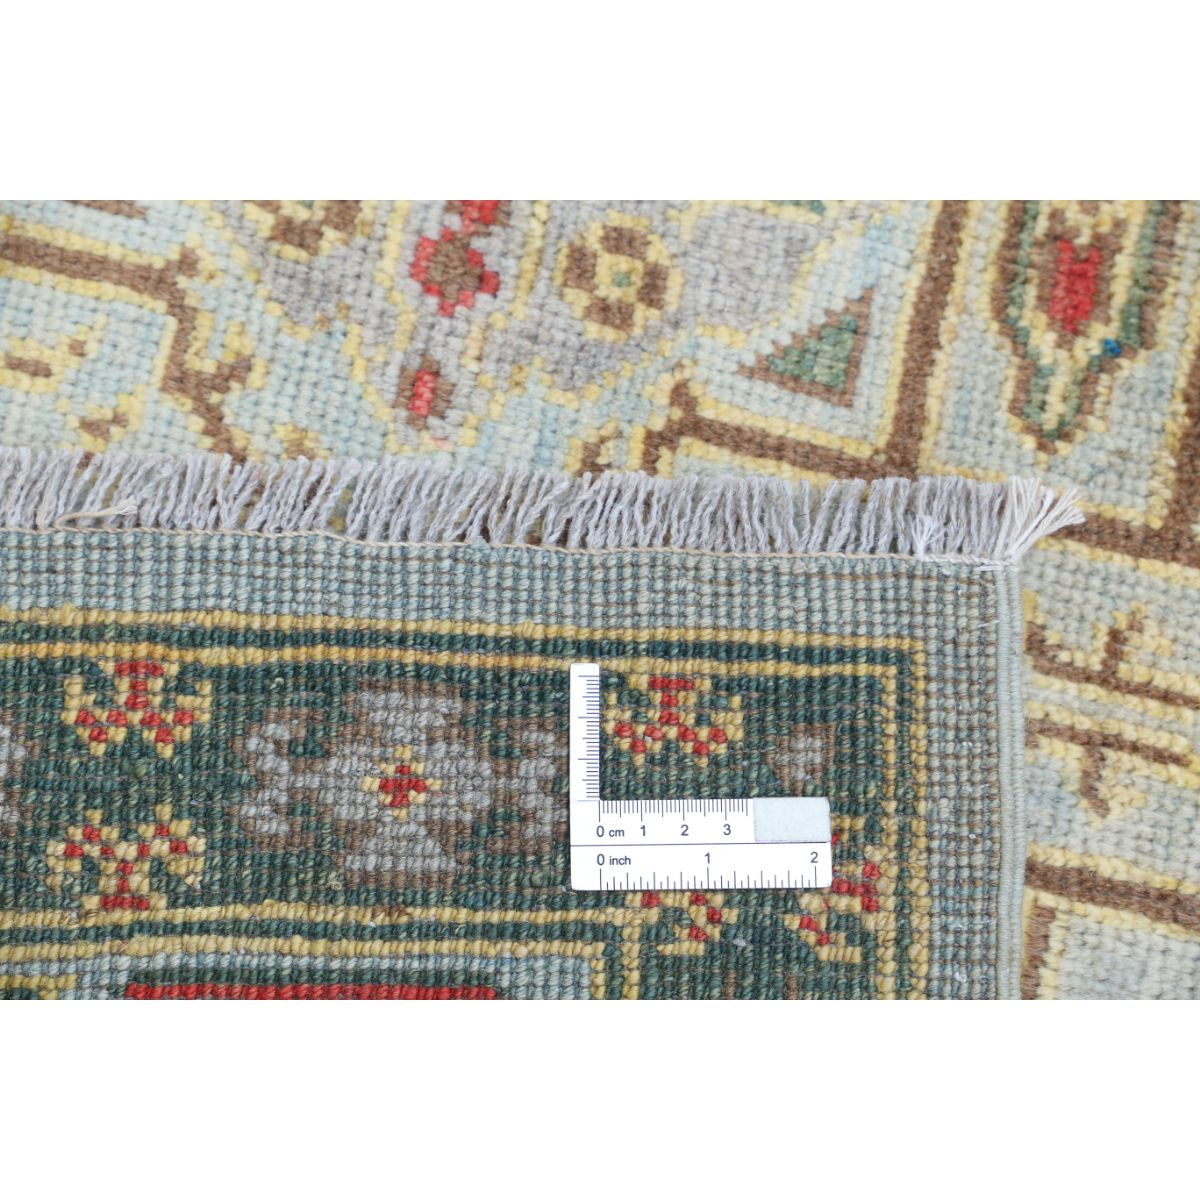 Revival 6' 7" X 9' 8" Wool Hand Knotted Rug